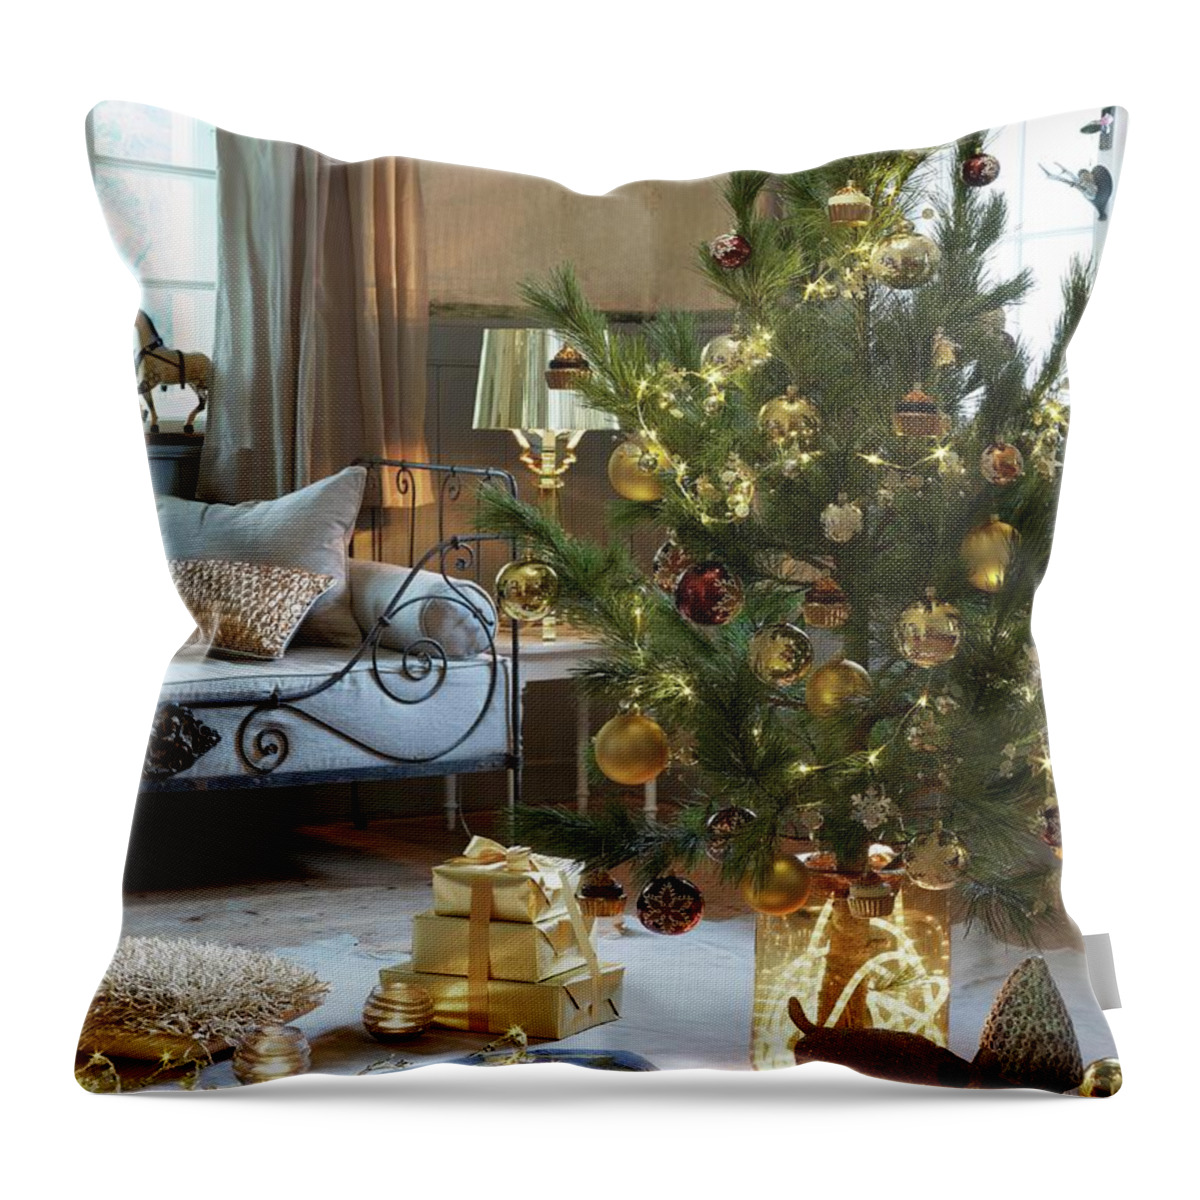 Ip_11172736 Throw Pillow featuring the photograph Decorated Christmas Tree And Presents On Floor In Front Of Bench With Metal Frame In Rustic Living Room by Matteo Manduzio